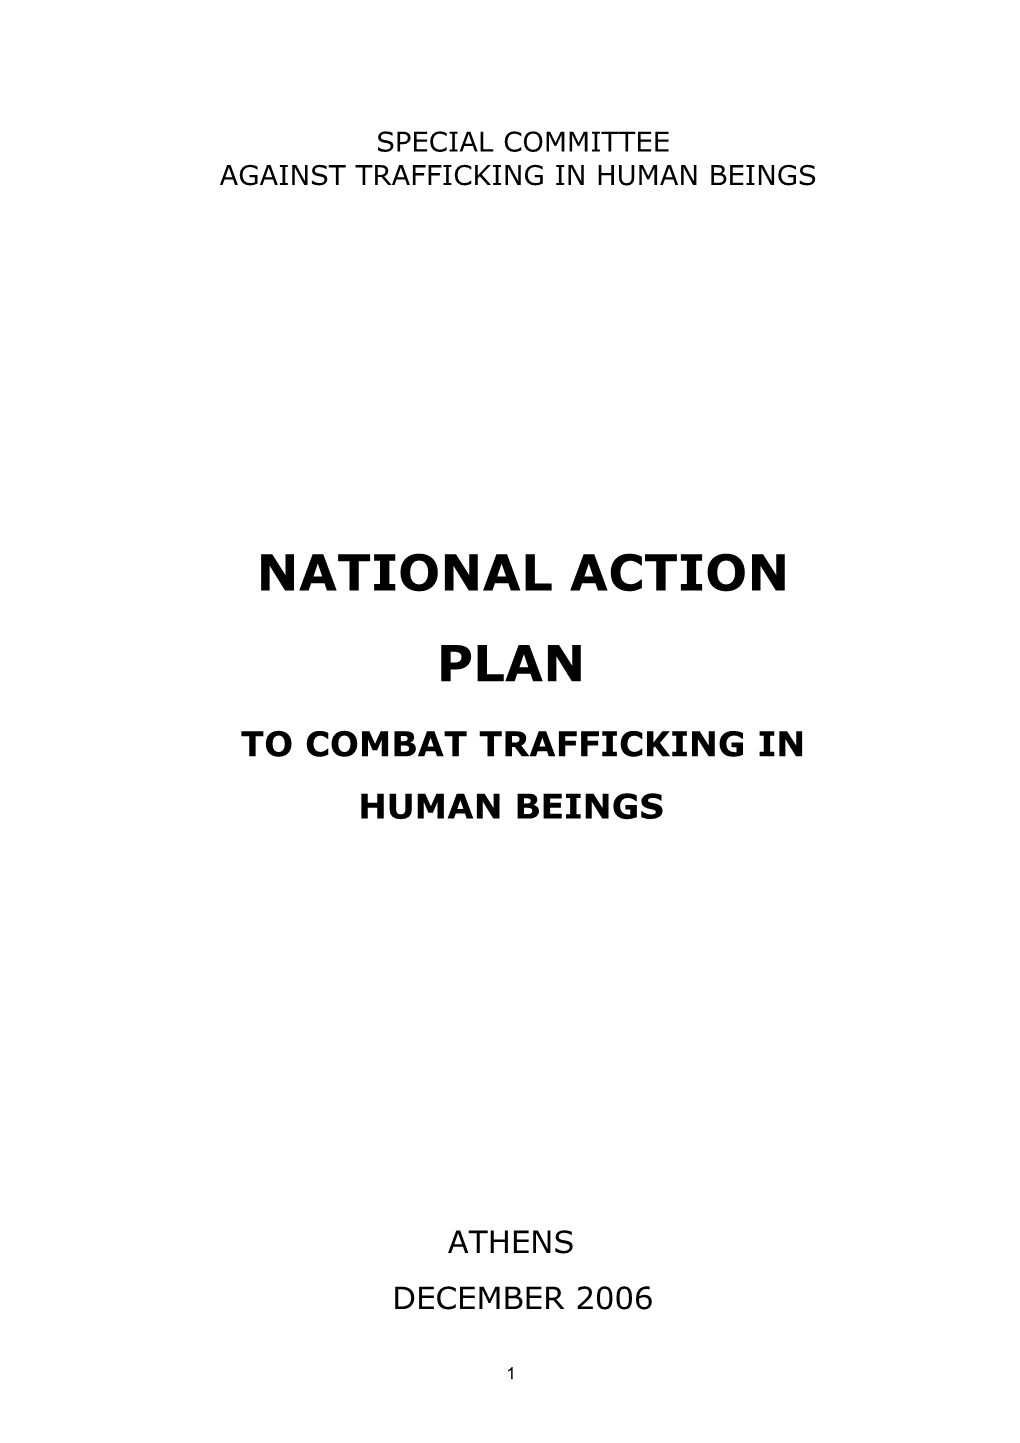 Against Trafficking in Human Beings